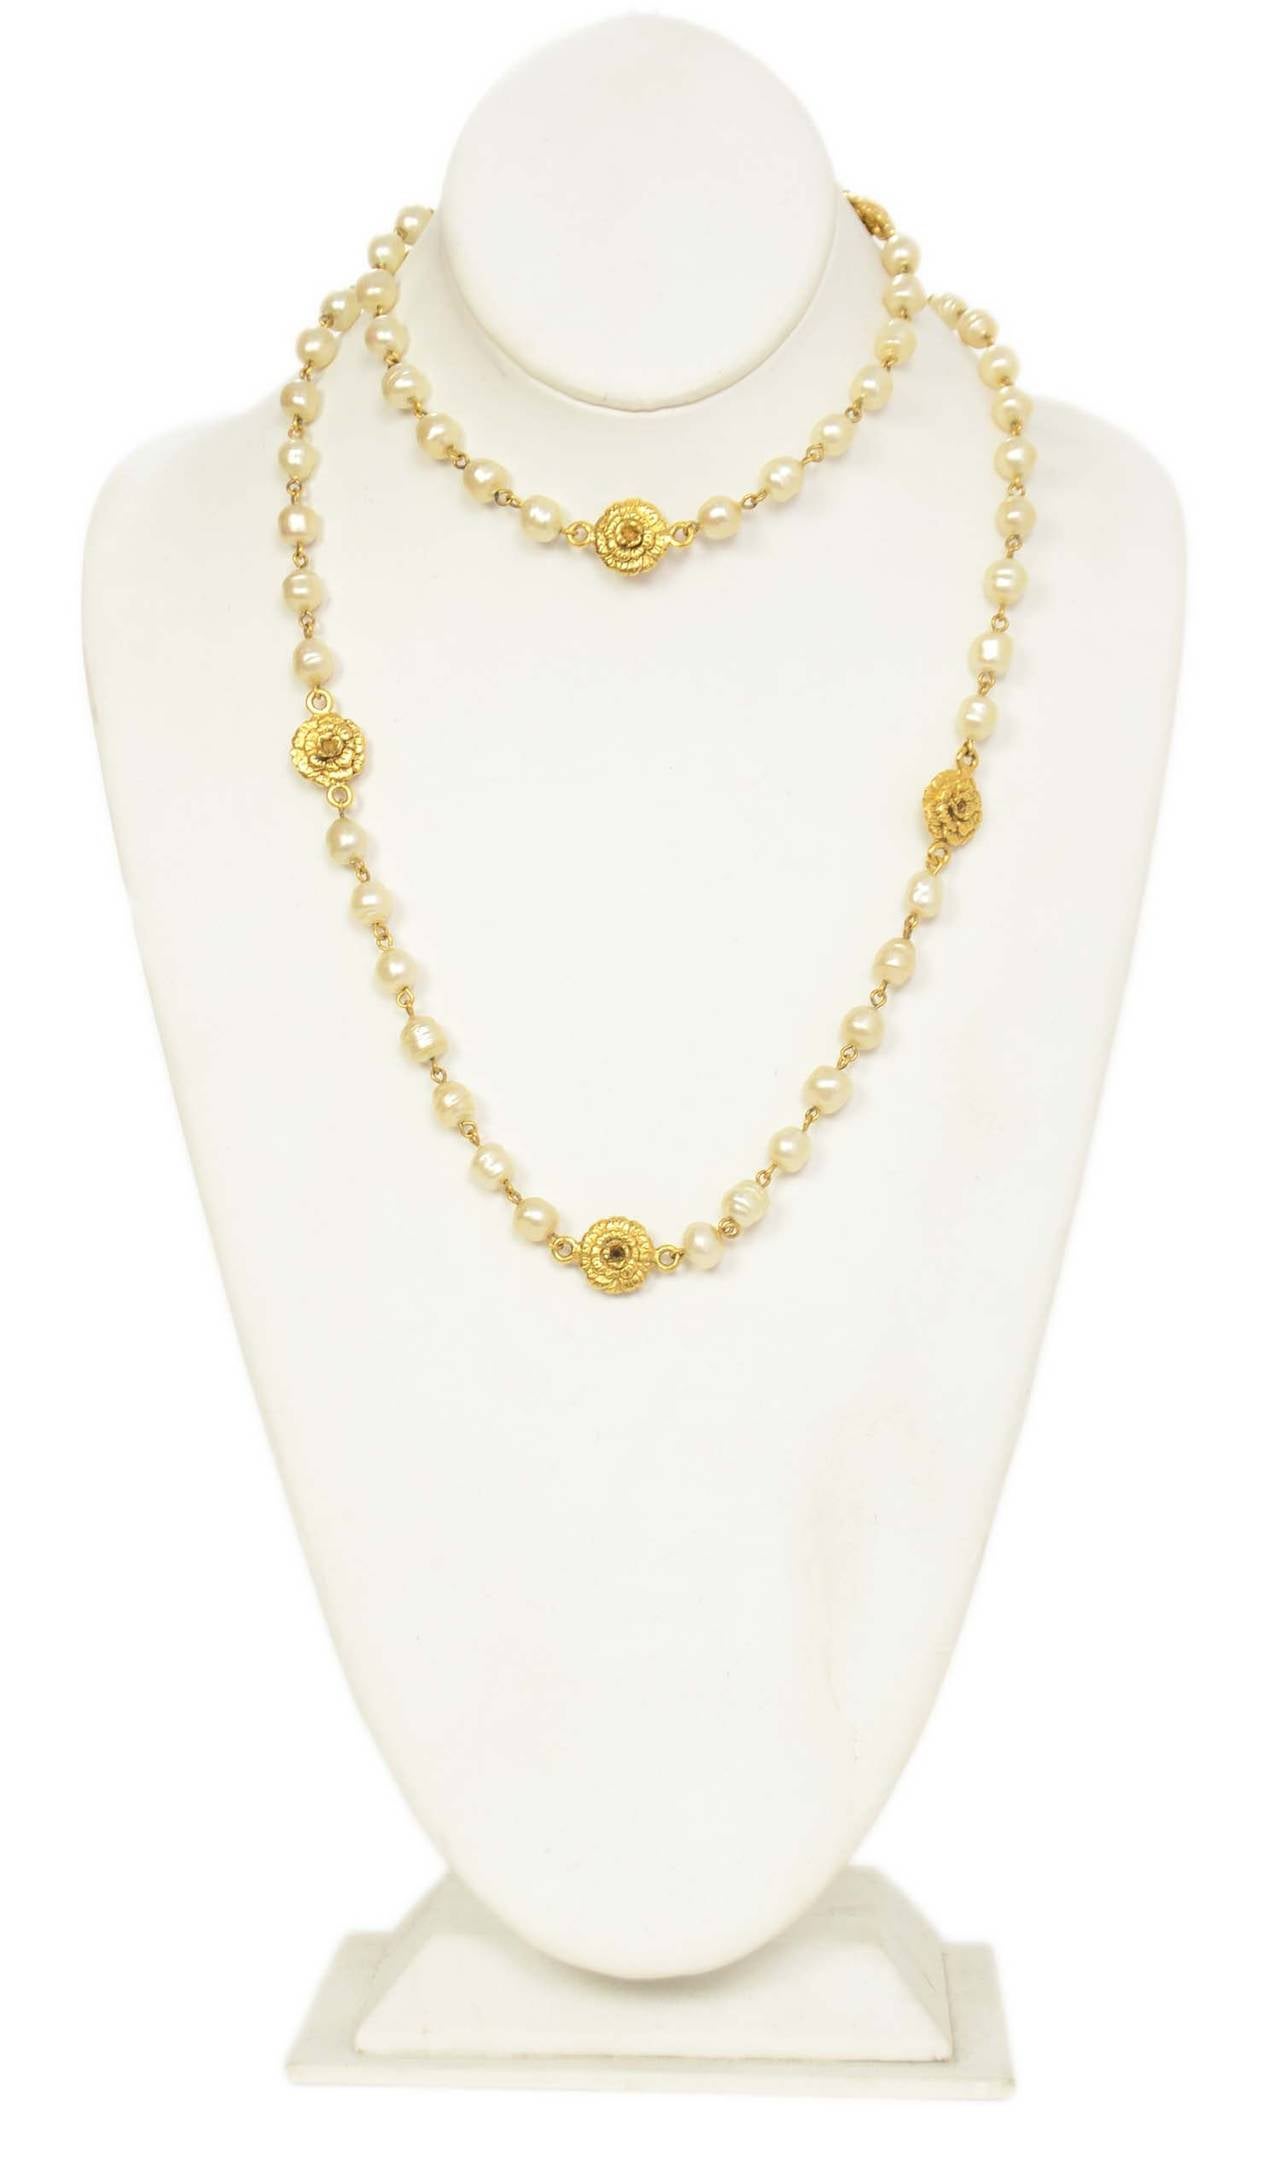 Chanel Vintage '82 Pearl Necklace w/Gold Rose PendantsFeatures CC engraved on clasp

    Made in: France
    Year of Production: 1982
    Stamp: CHANEL CC 1982
    Closure: Push and click clasp
    Color: Ivory and goldtone
    Materials: